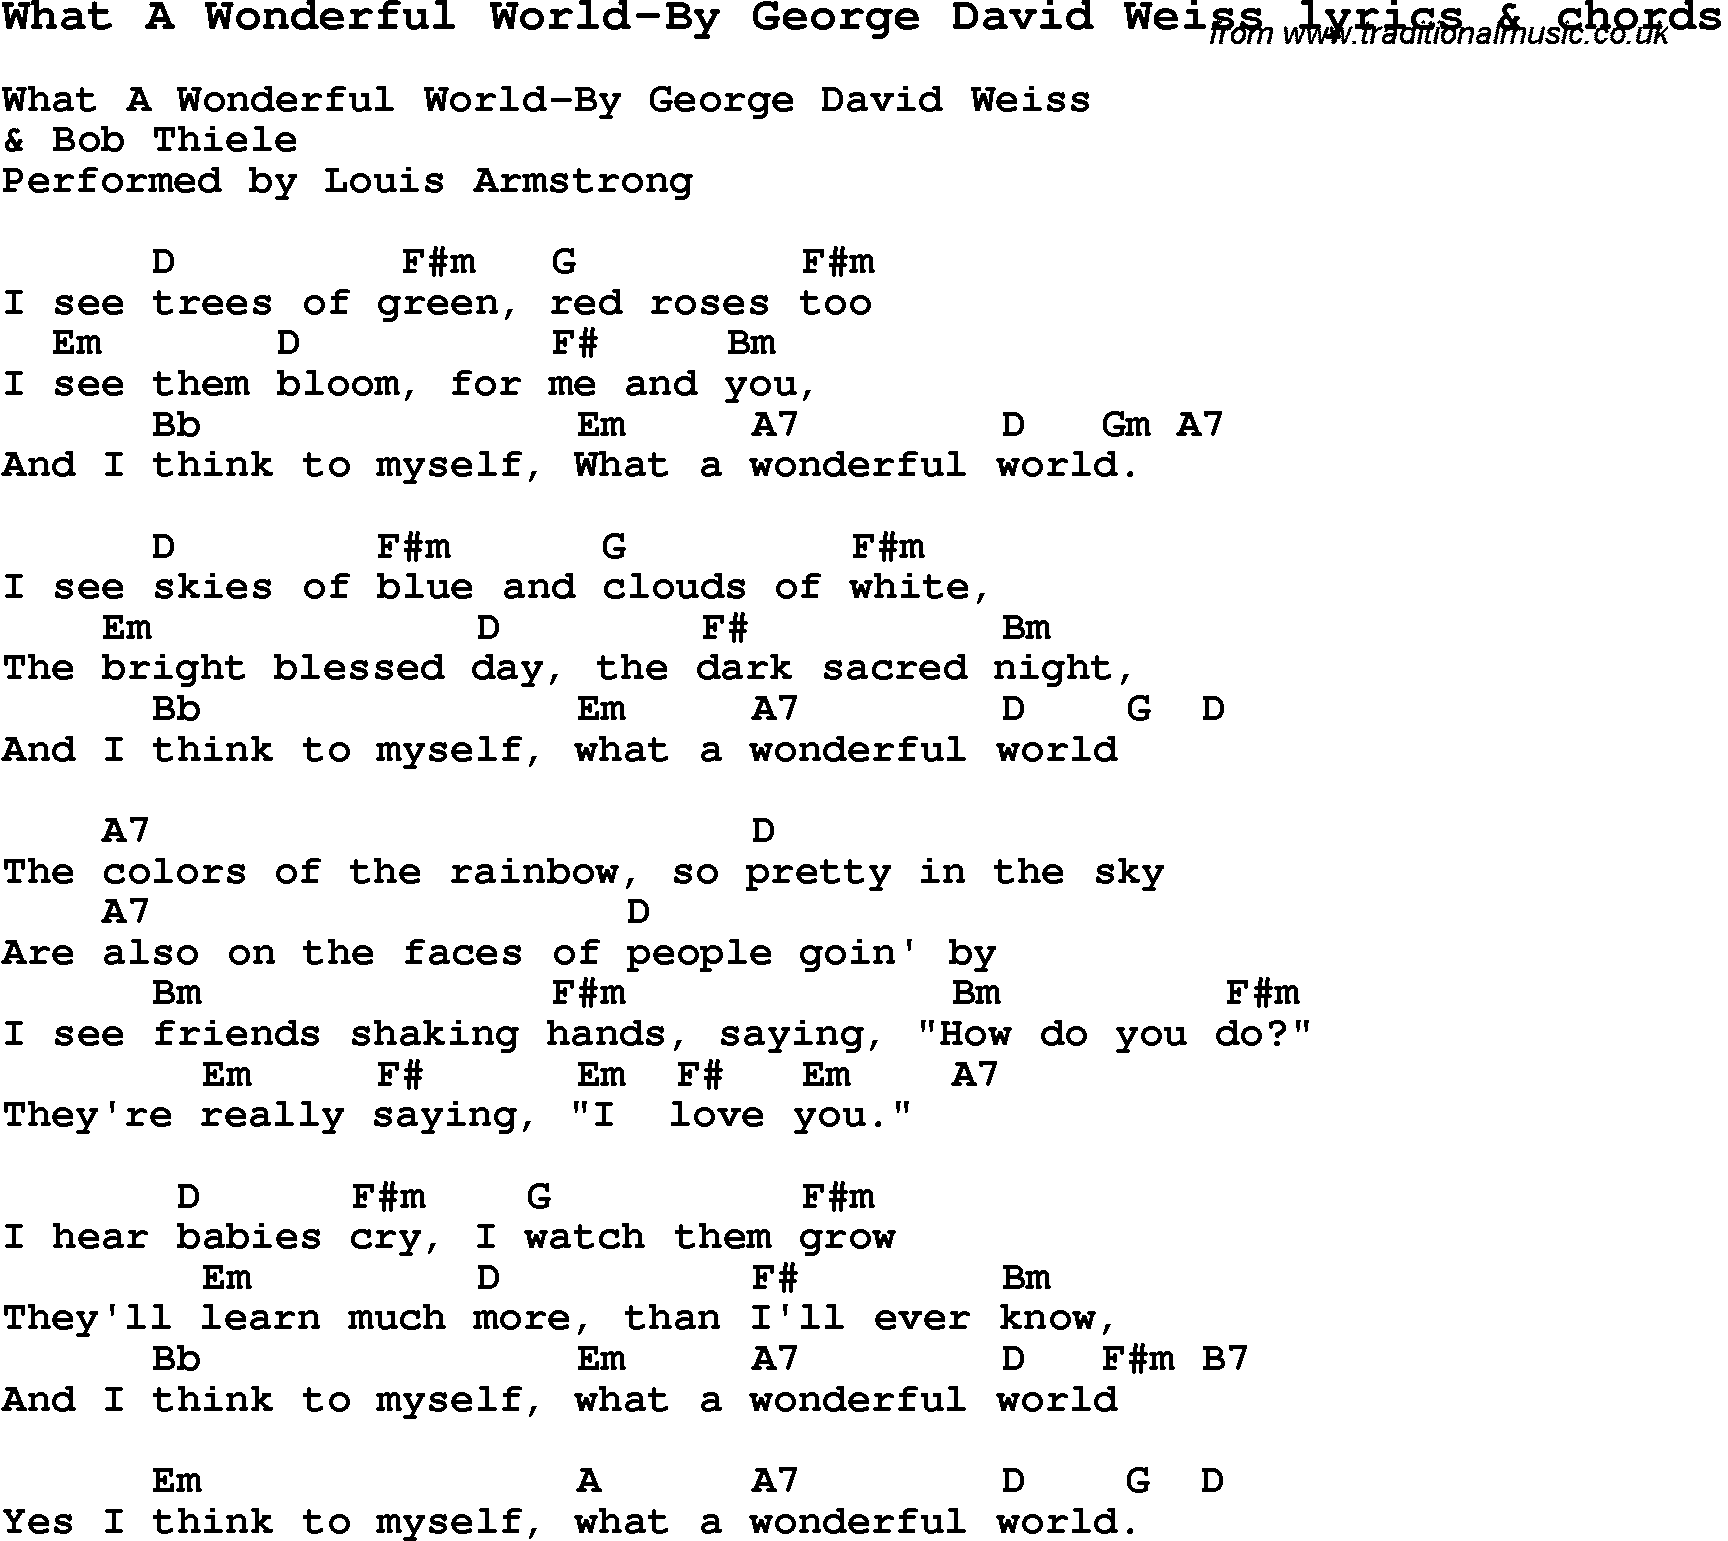 Love Song Lyrics for: What A Wonderful World-By George David Weiss with chords for Ukulele, Guitar Banjo etc.